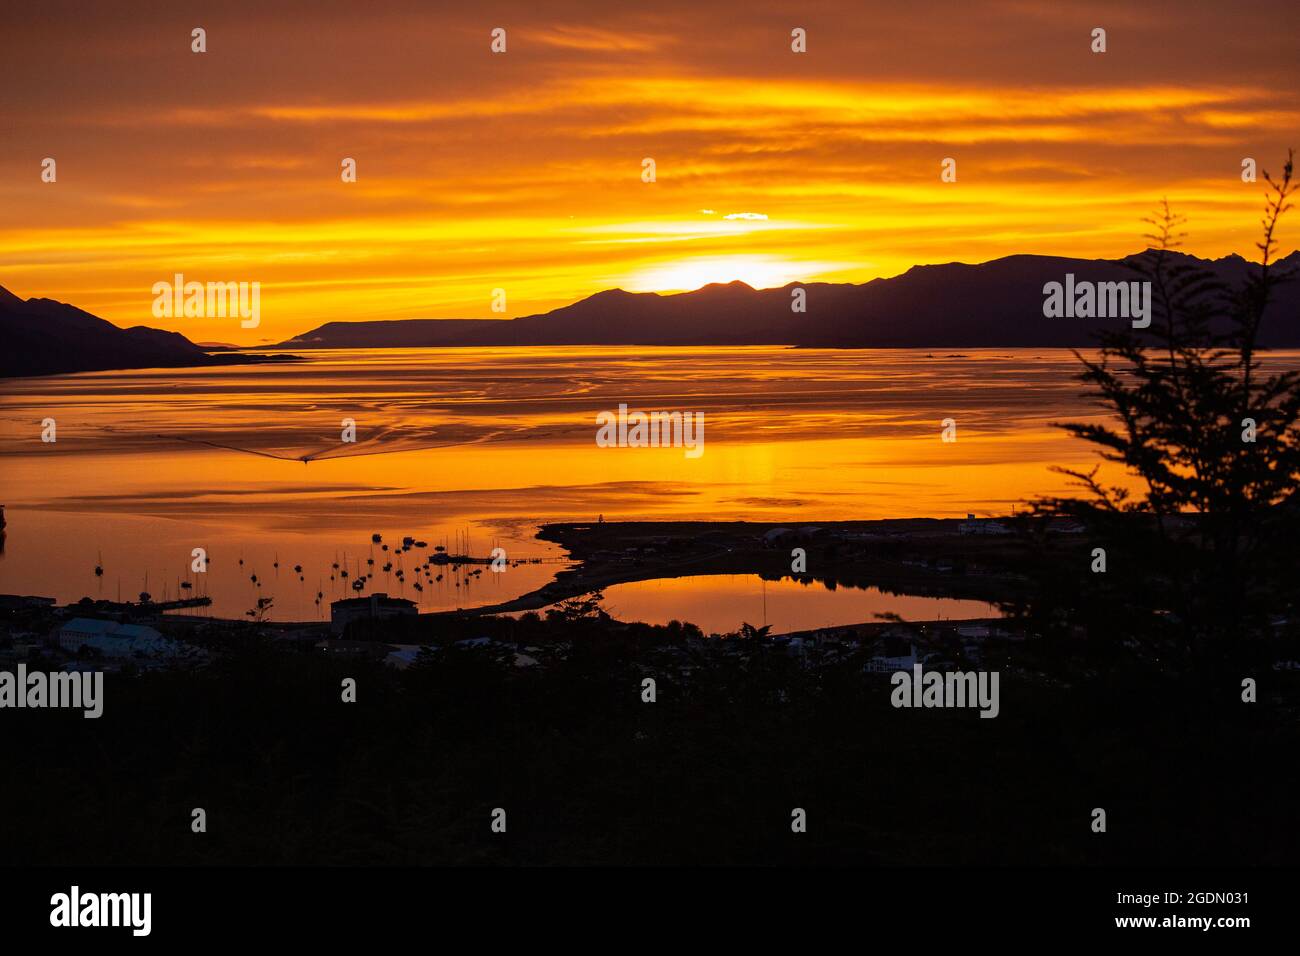 Sunset over the Bay of Ushuaia the southernmost city in the word and the capital of Tierra del Fuego, Antartida e Islas del Atlantico Sur Province, Ar Stock Photo